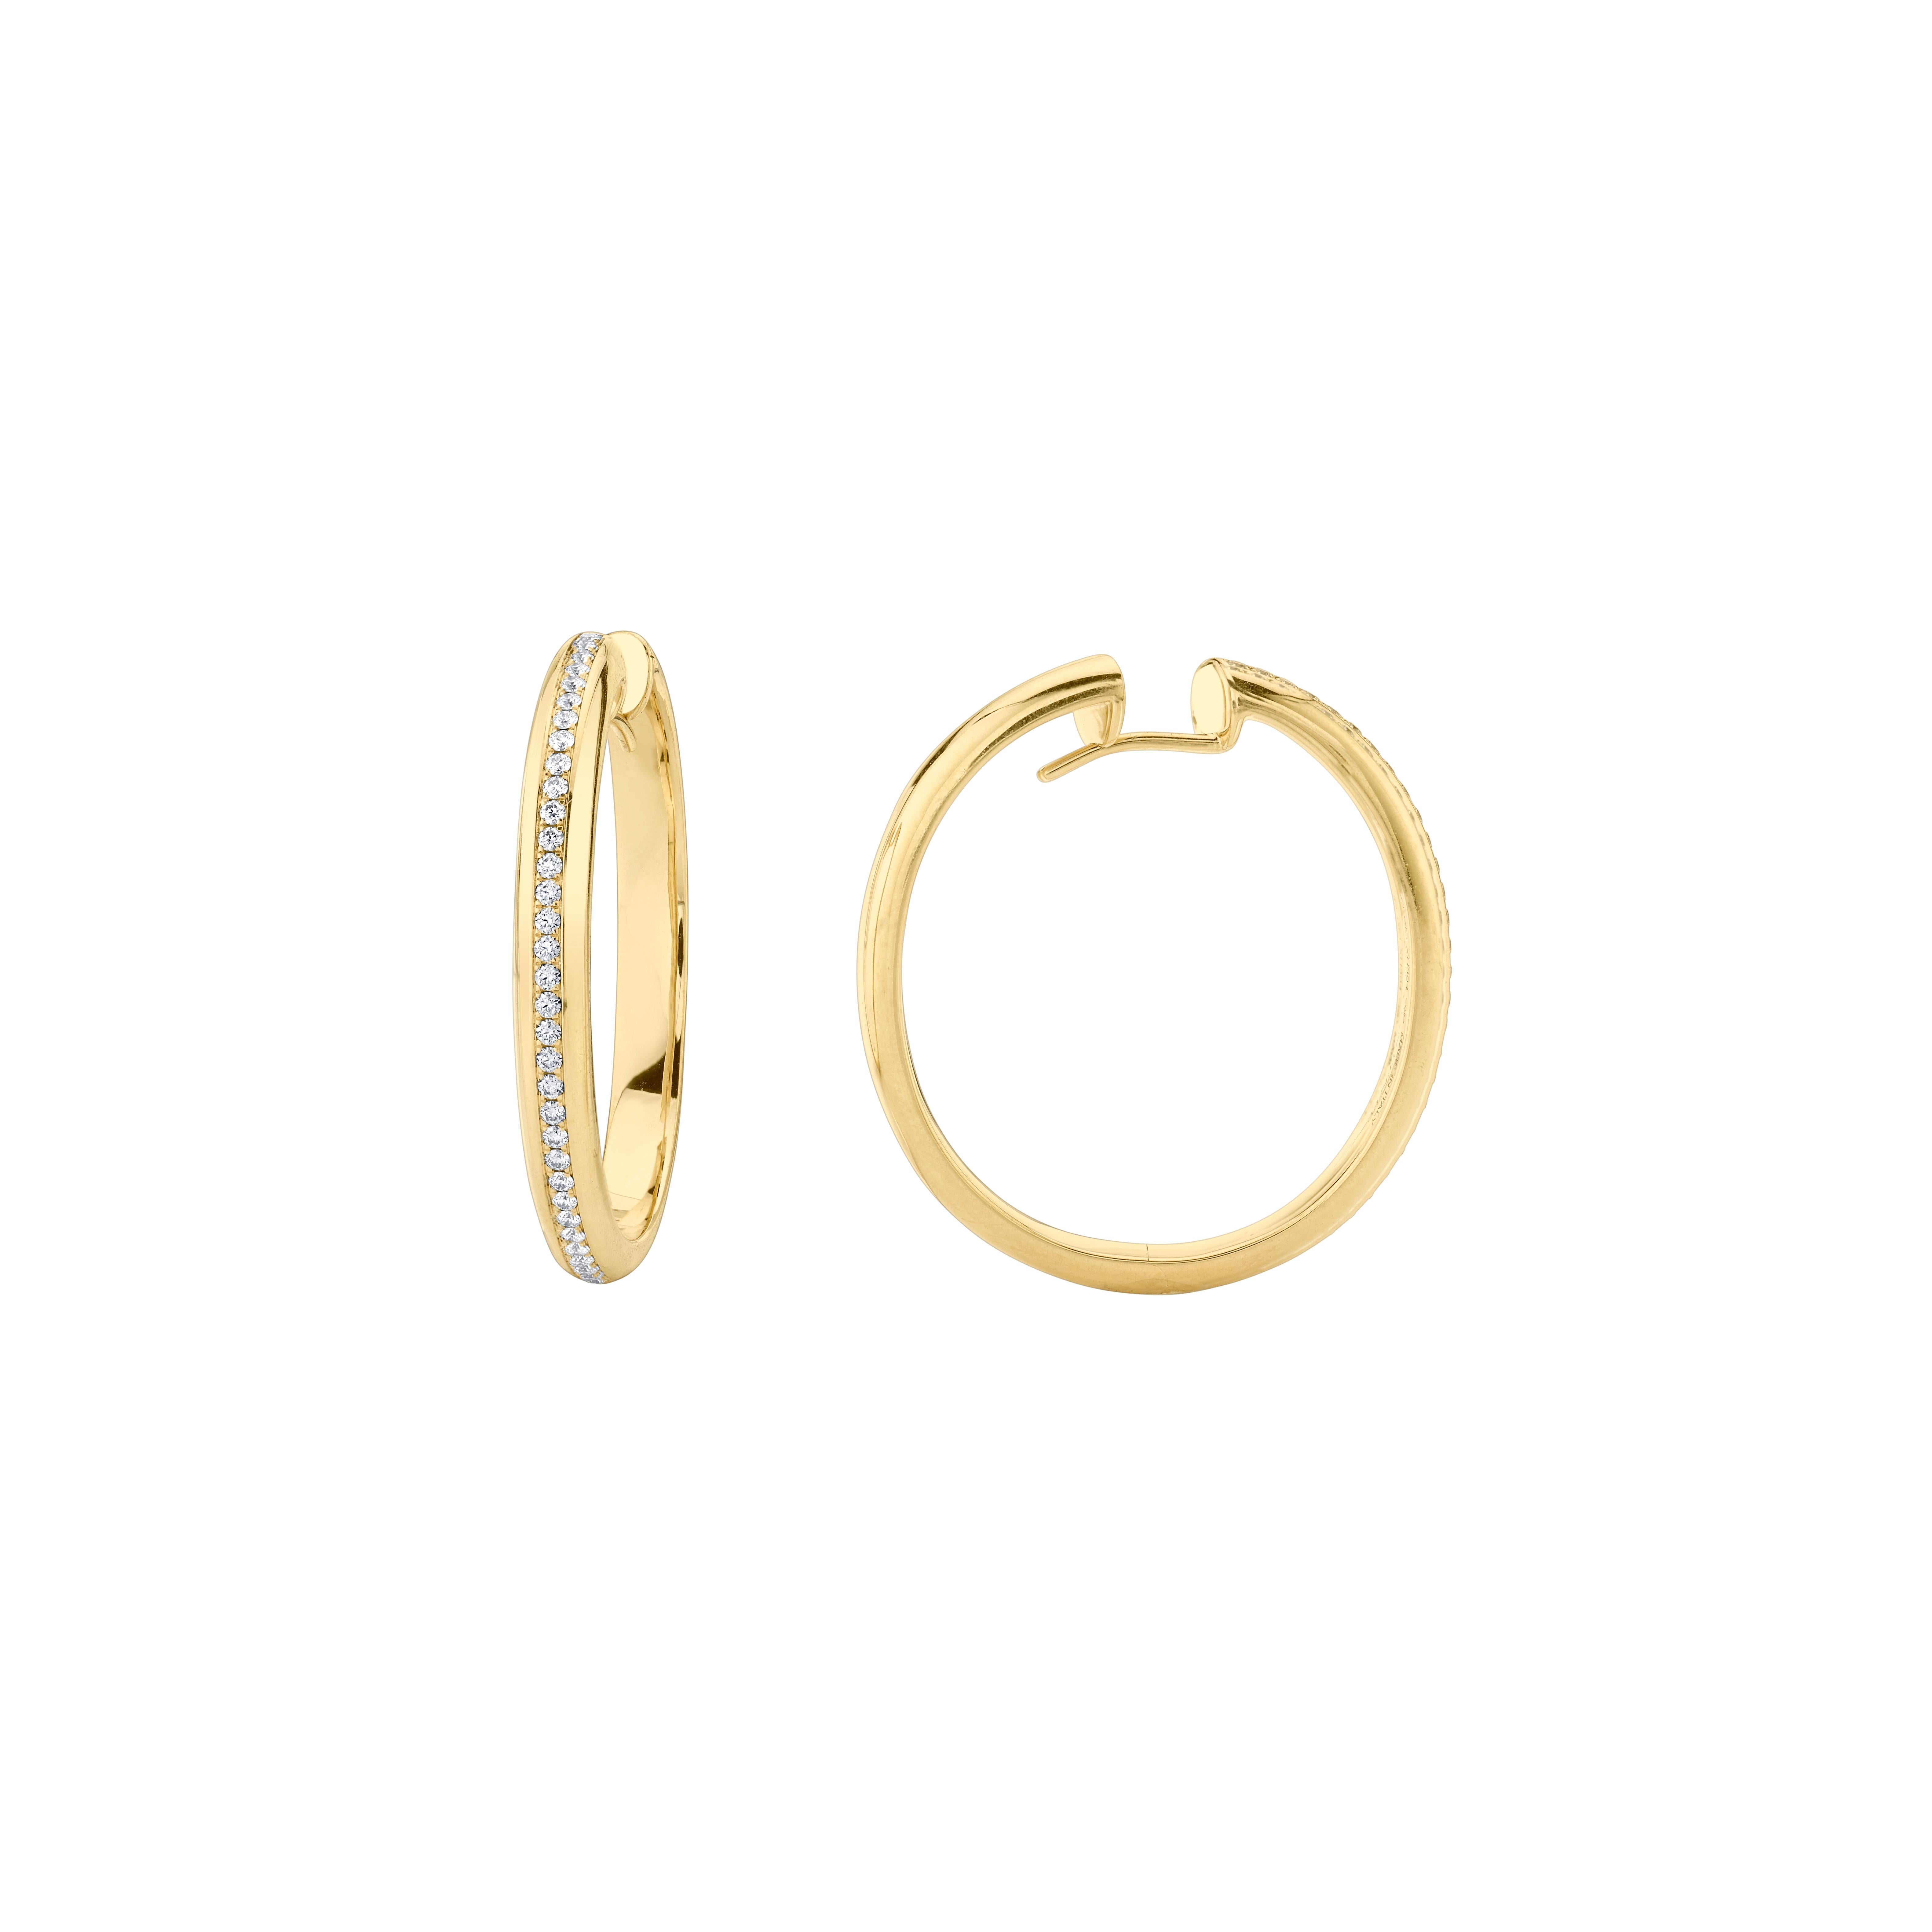 Style #: XH304P.
SYLVIA KONTENTE  18K Yellow gold diamond hoop earrings with polished finish.
Precision-cut, round brilliant diamonds.
Diamond total weight: 0.62ct tw.
Diamond color/clarity: DEF/VVS VS.
Polished finish.
High-end construction.
Size: